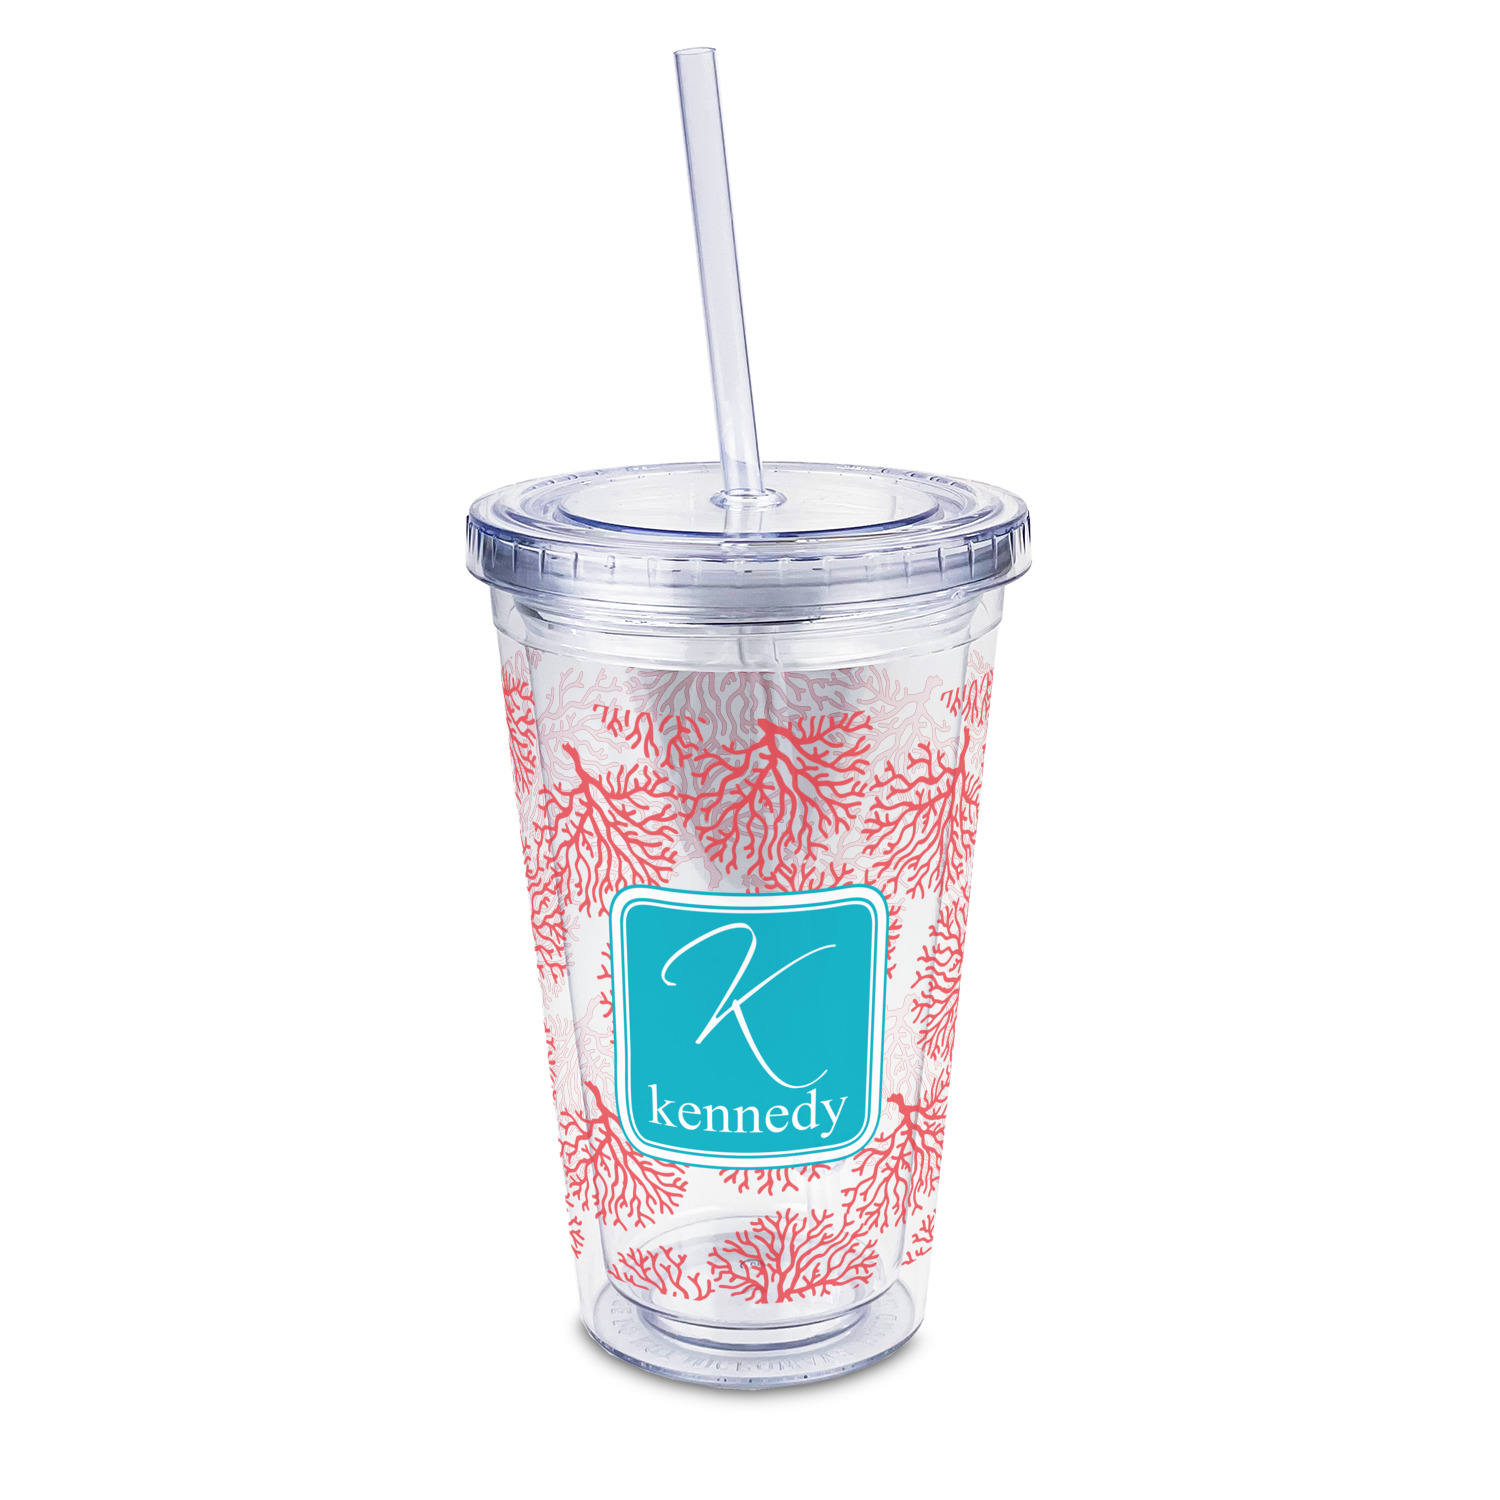 https://www.youcustomizeit.com/common/MAKE/171656/Coral-Teal-Acrylic-Tumbler-Full-Print-Front-Main.jpg?lm=1666043784